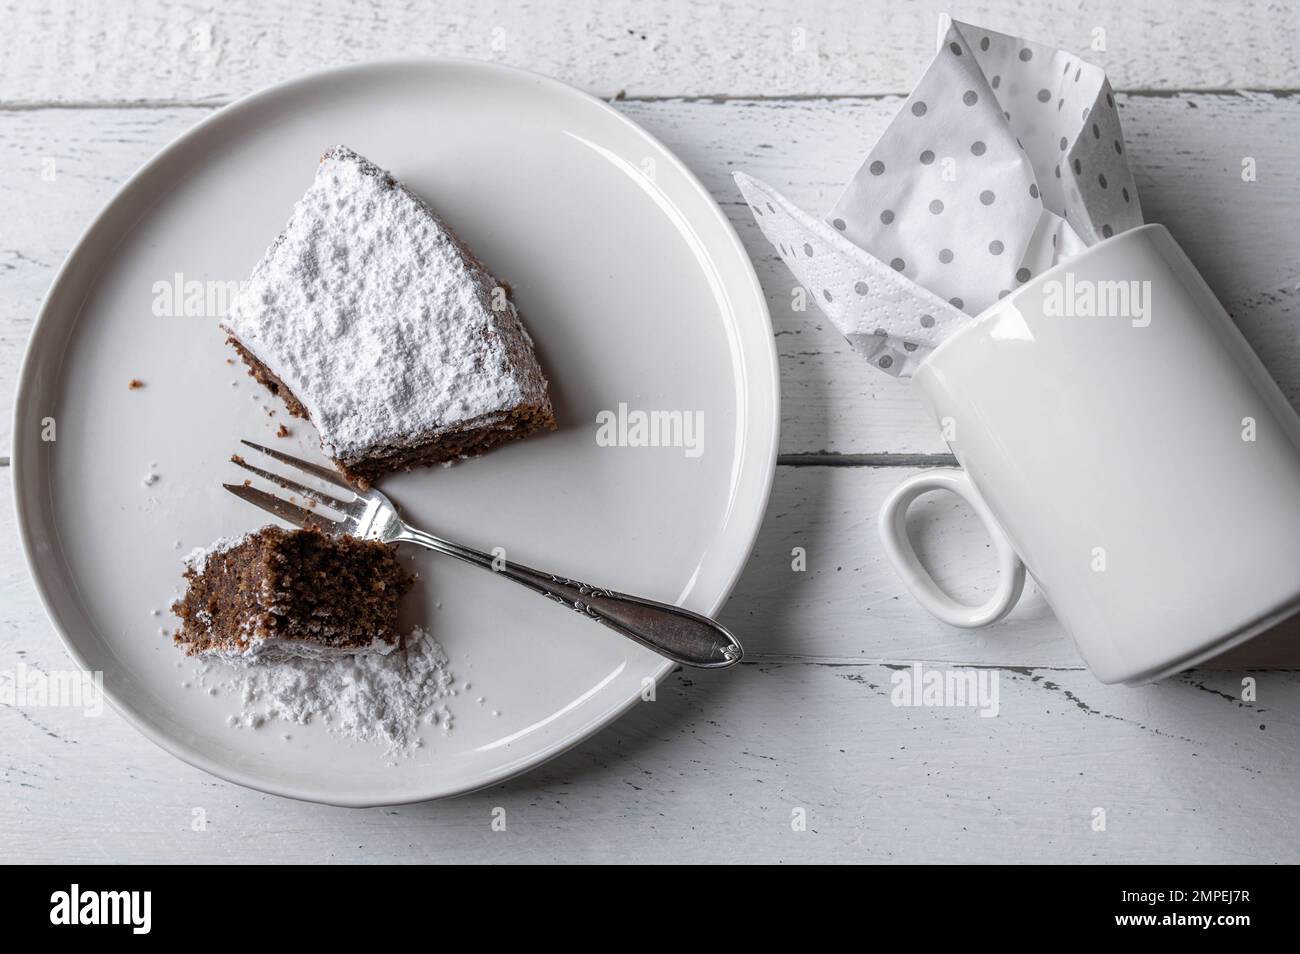 Slice of cake with cup isolated on white background. Flat lay Stock Photo